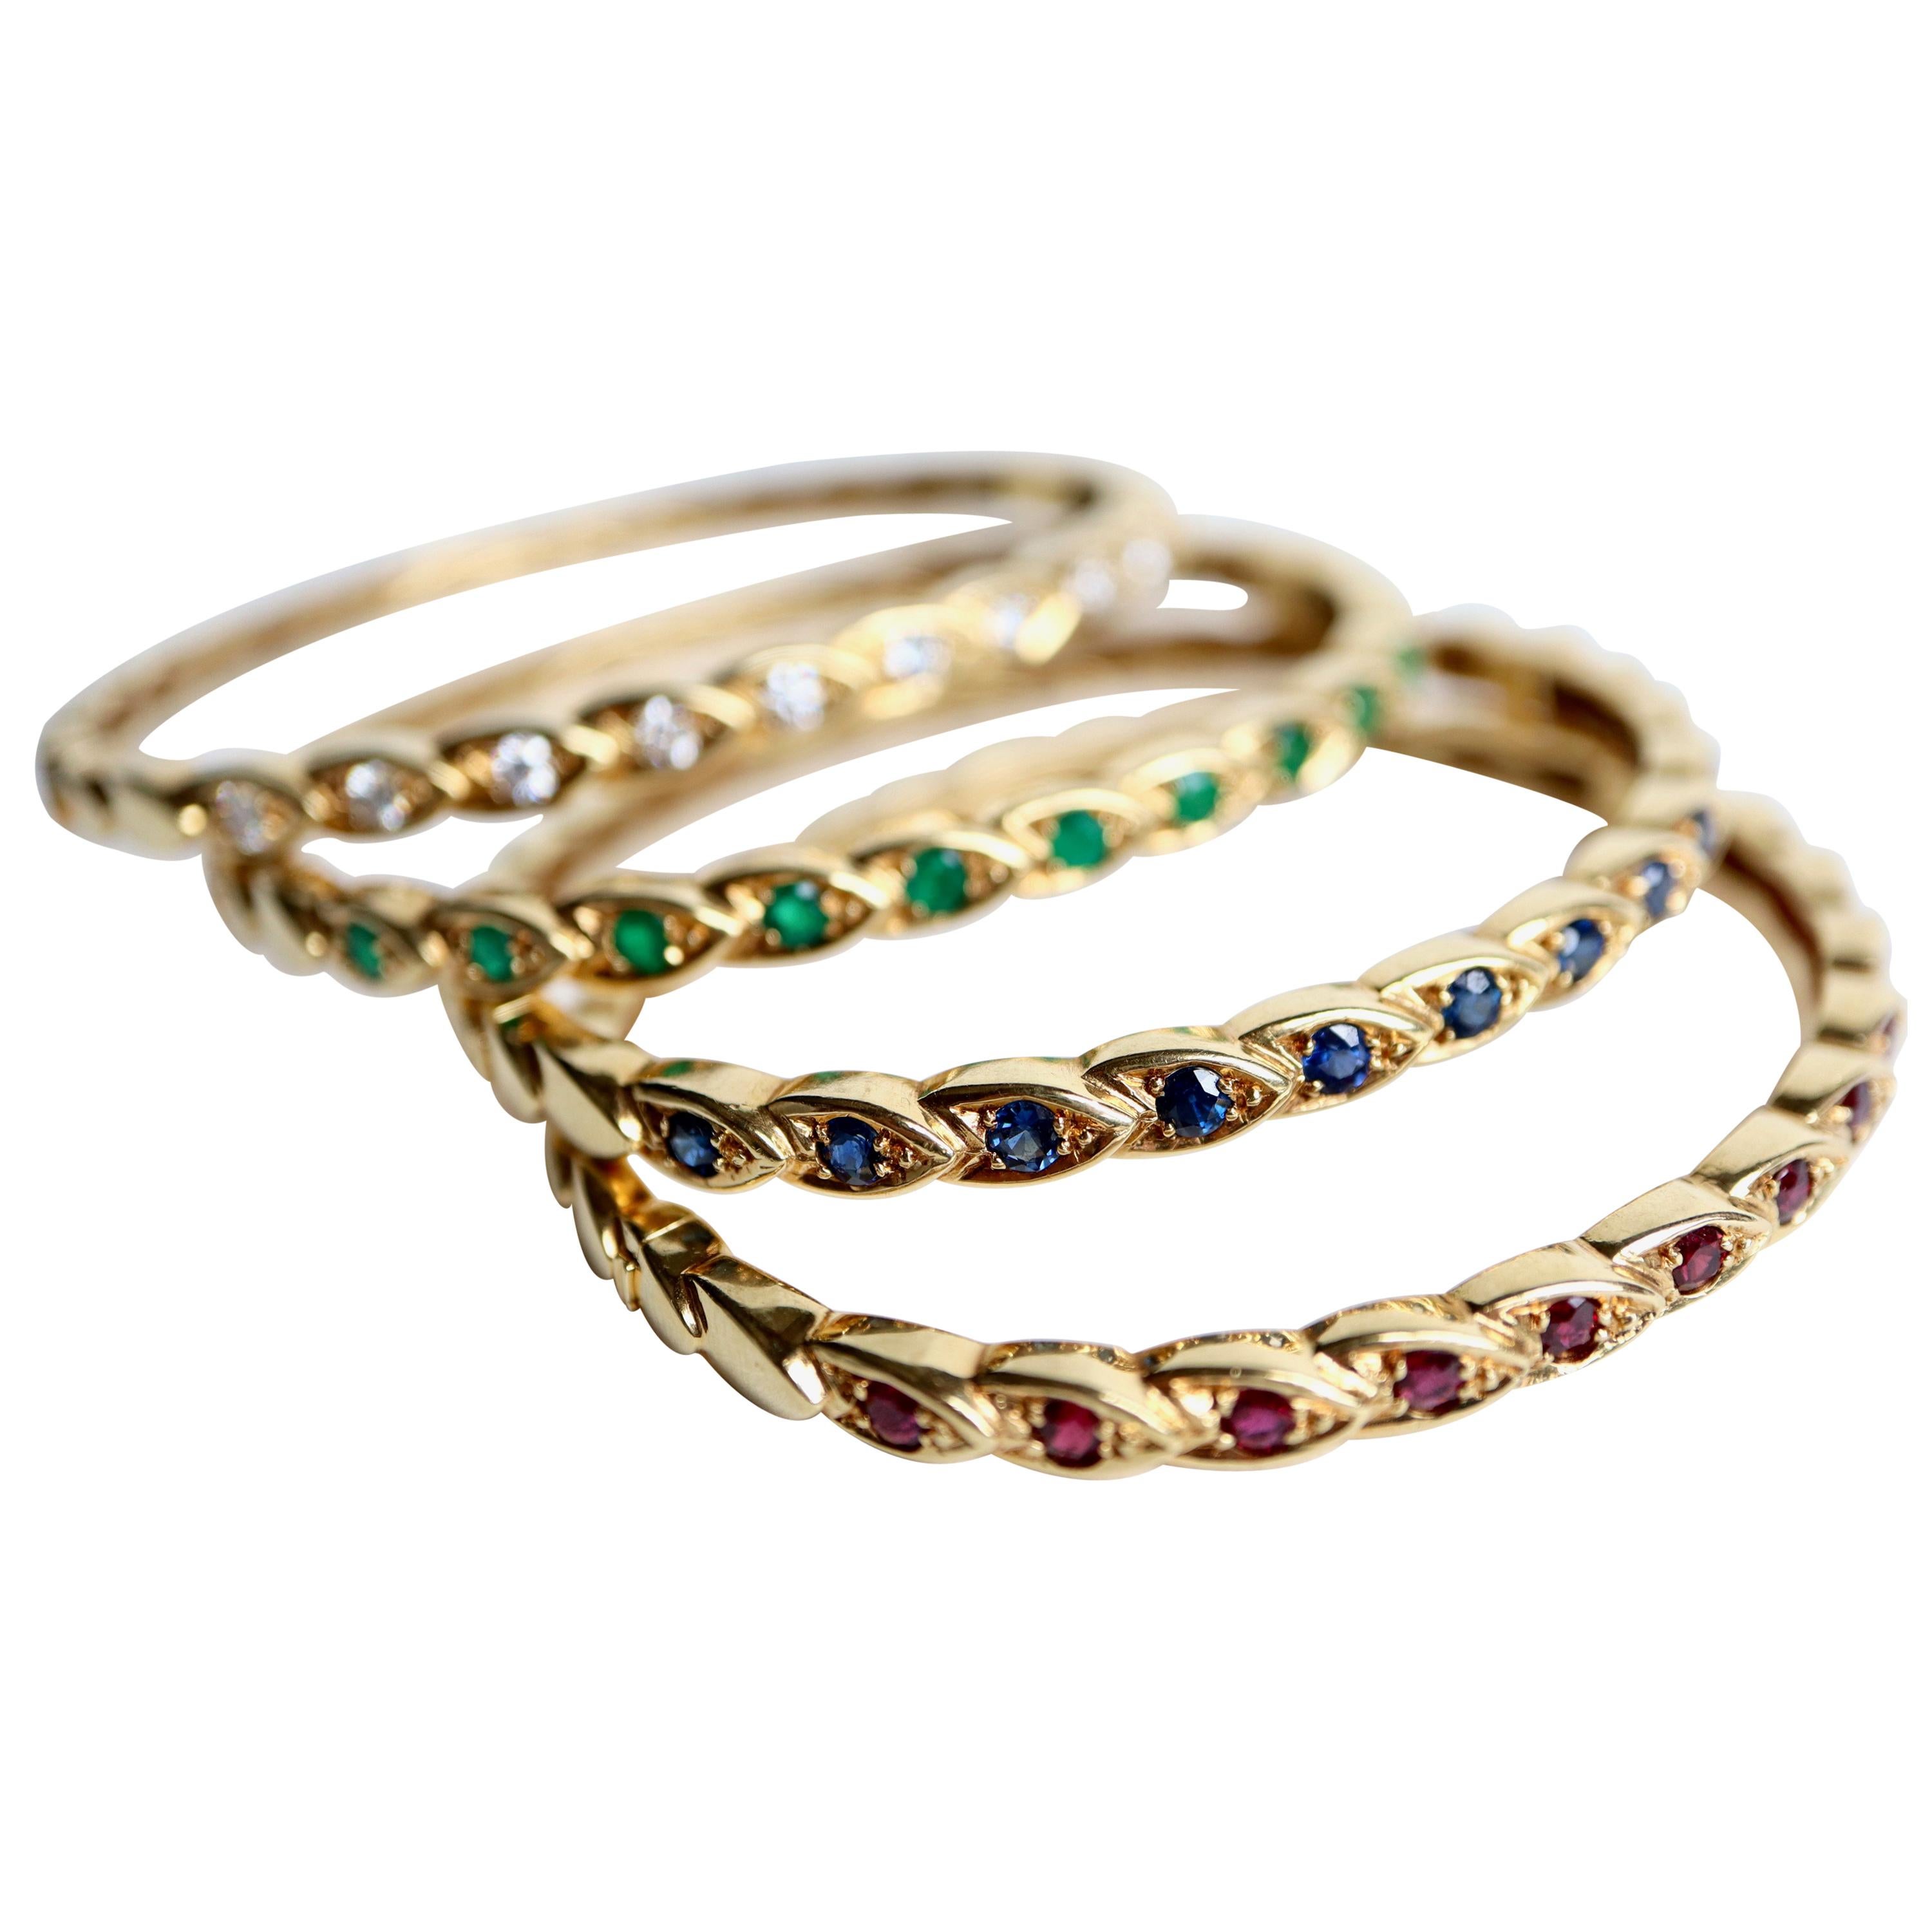 CHAUMET 4 Rigid bracelets in yellow gold and emerald, sapphire, ruby ​​and diamond precious stones. The bracelets are composed of ears of yellow gold among which a dozen ears crimp precious stones on the top of the bracelets. The bracelets are oval